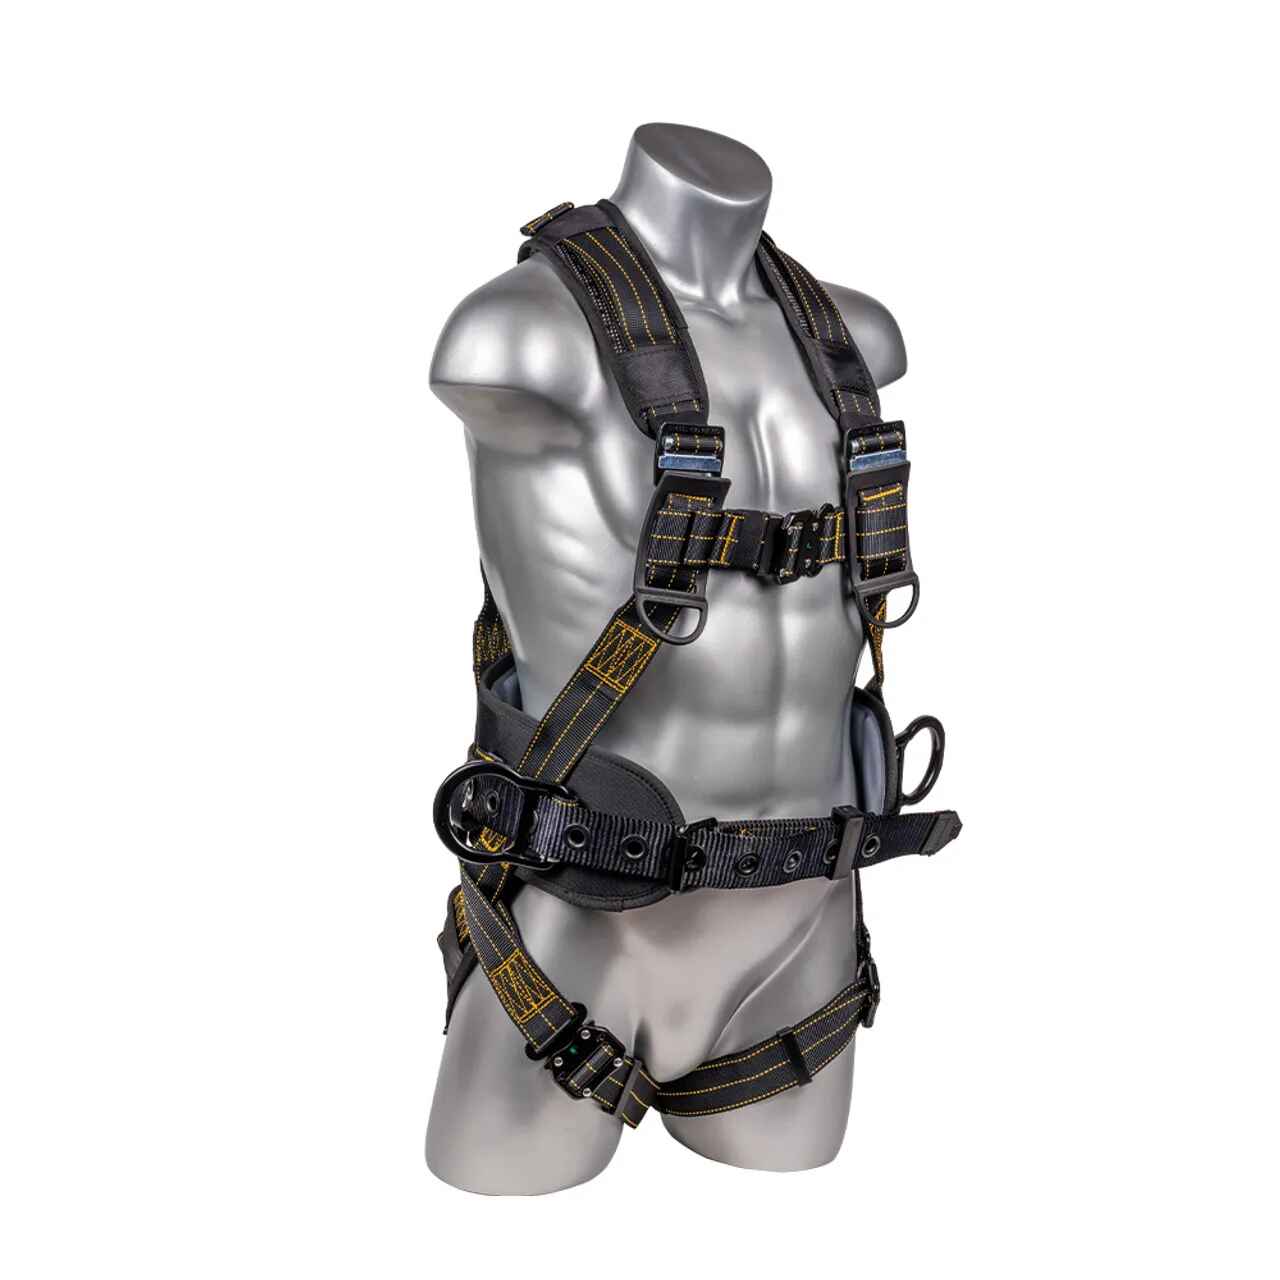 Construction Safety Harness 5 Point, Padded Back & Grommet Legs - Defender Safety